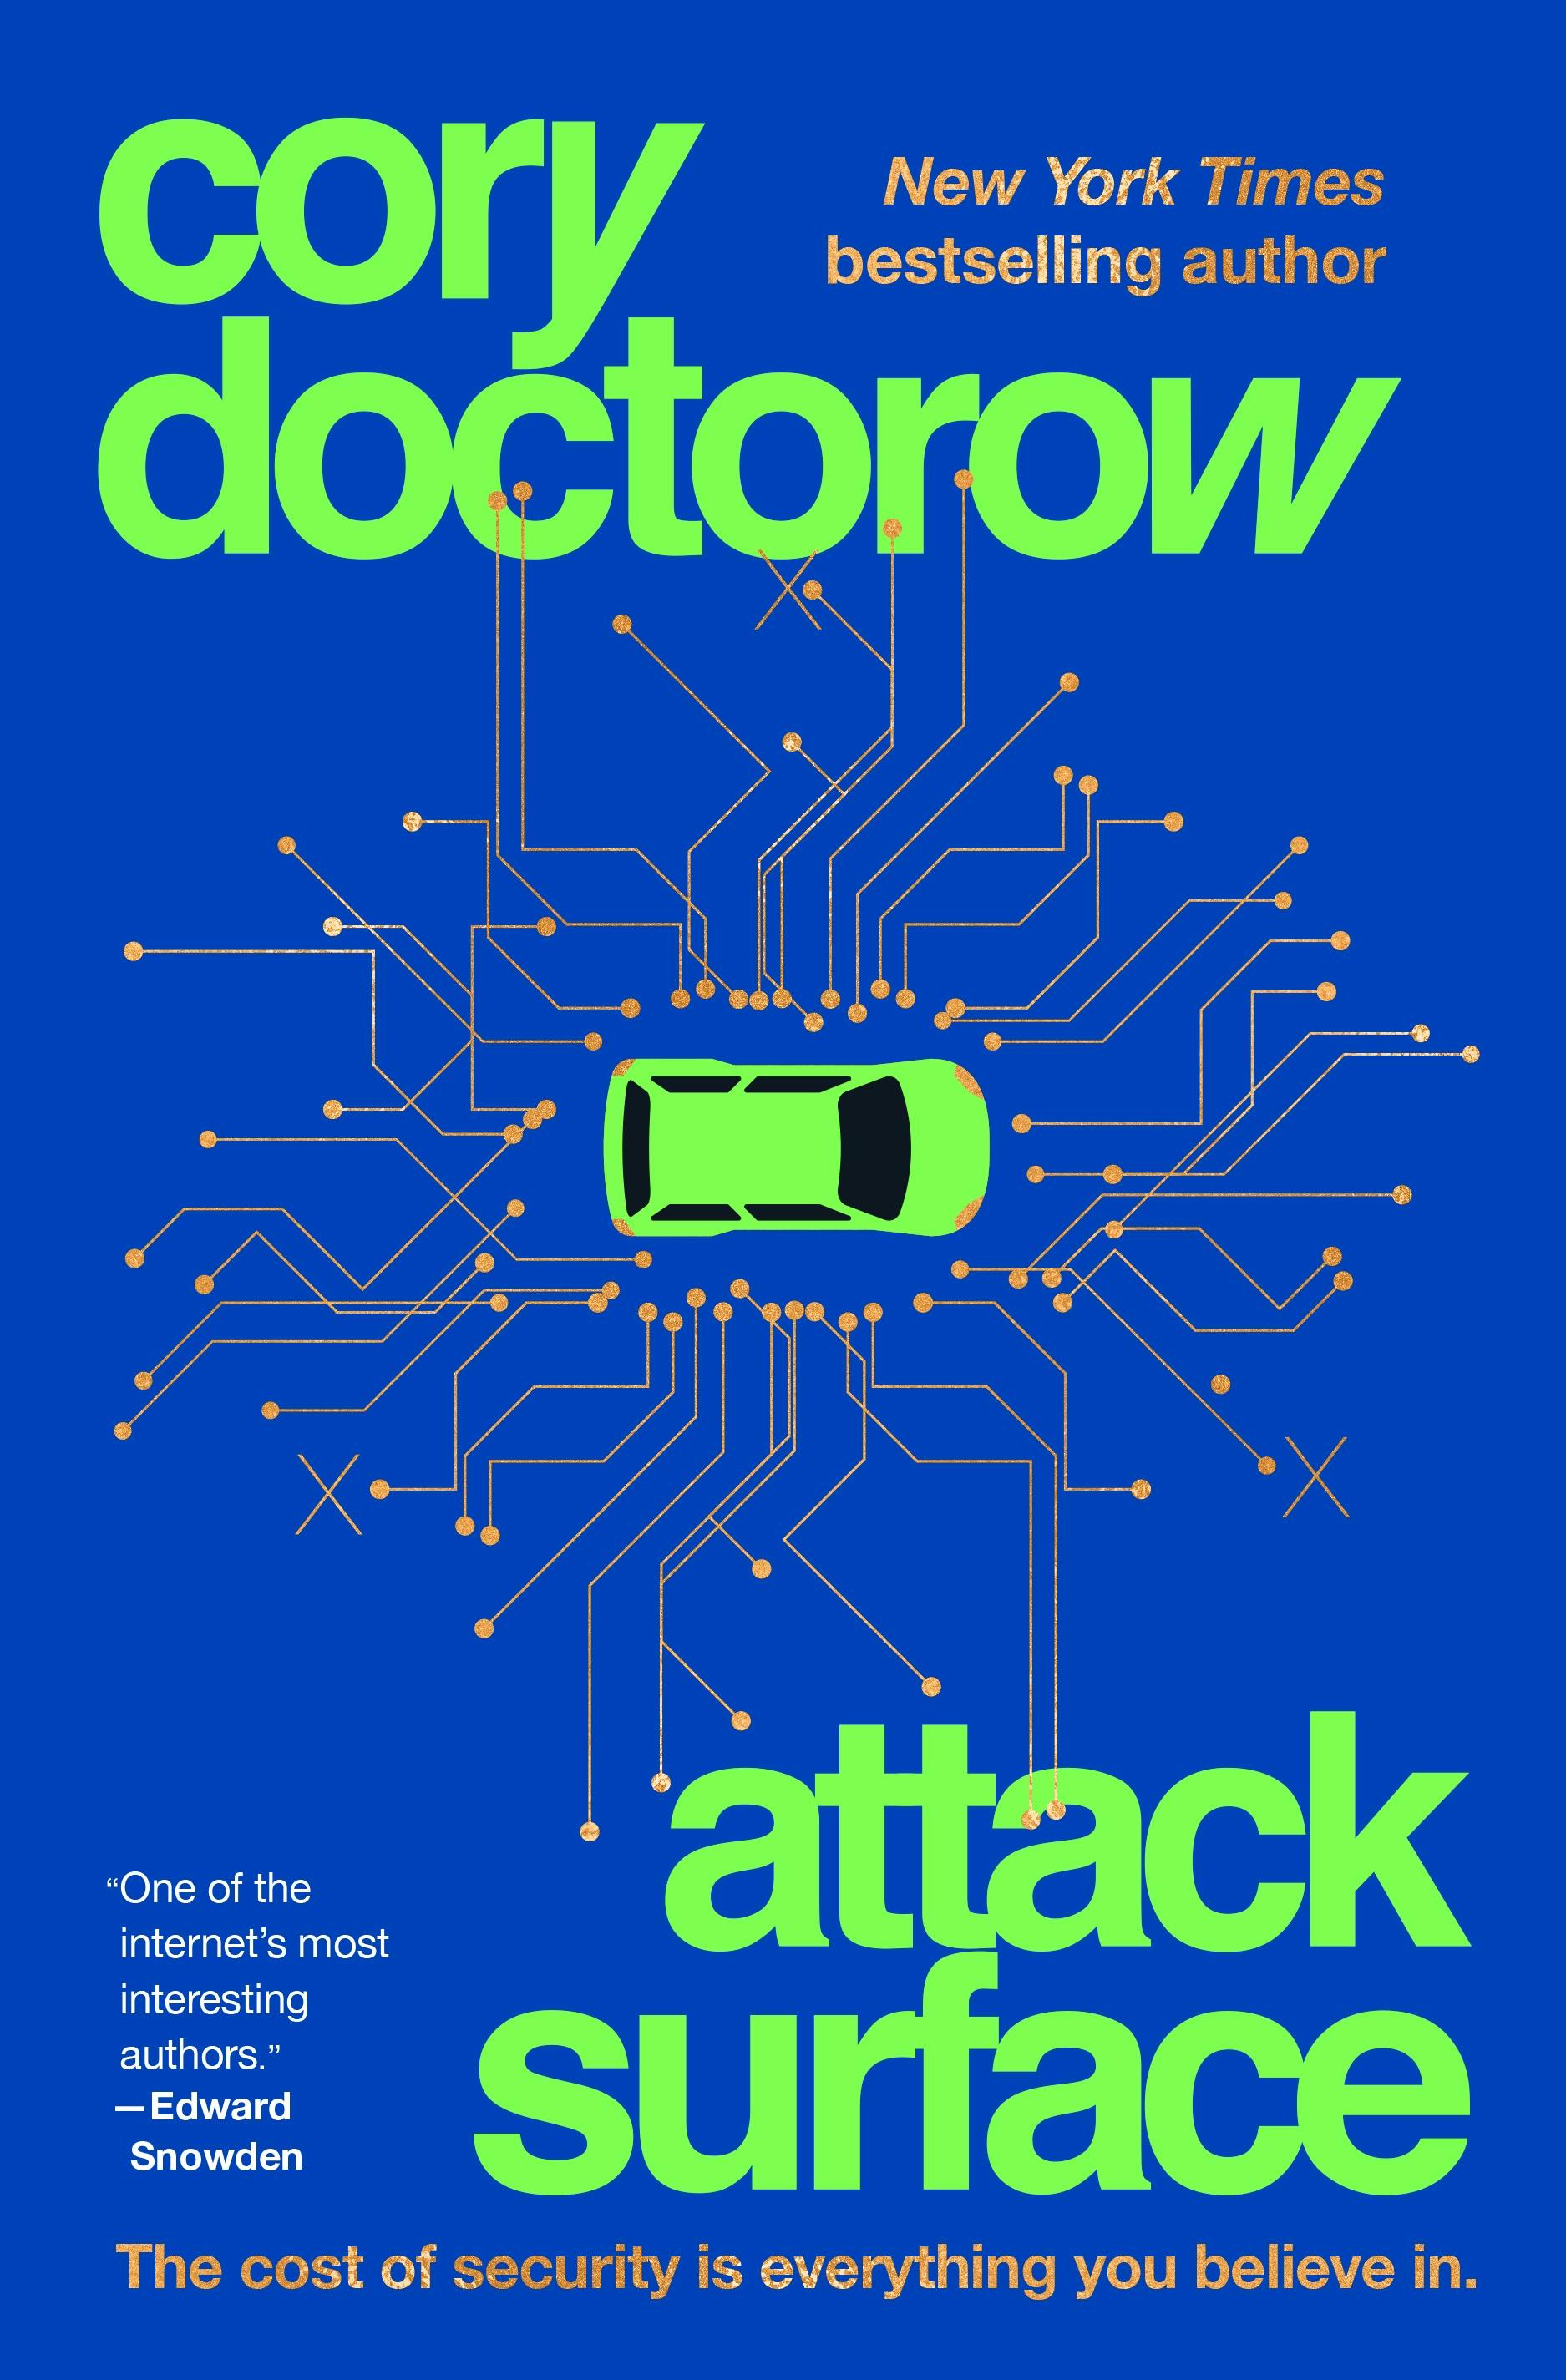 Cover for the book titled as: Attack Surface